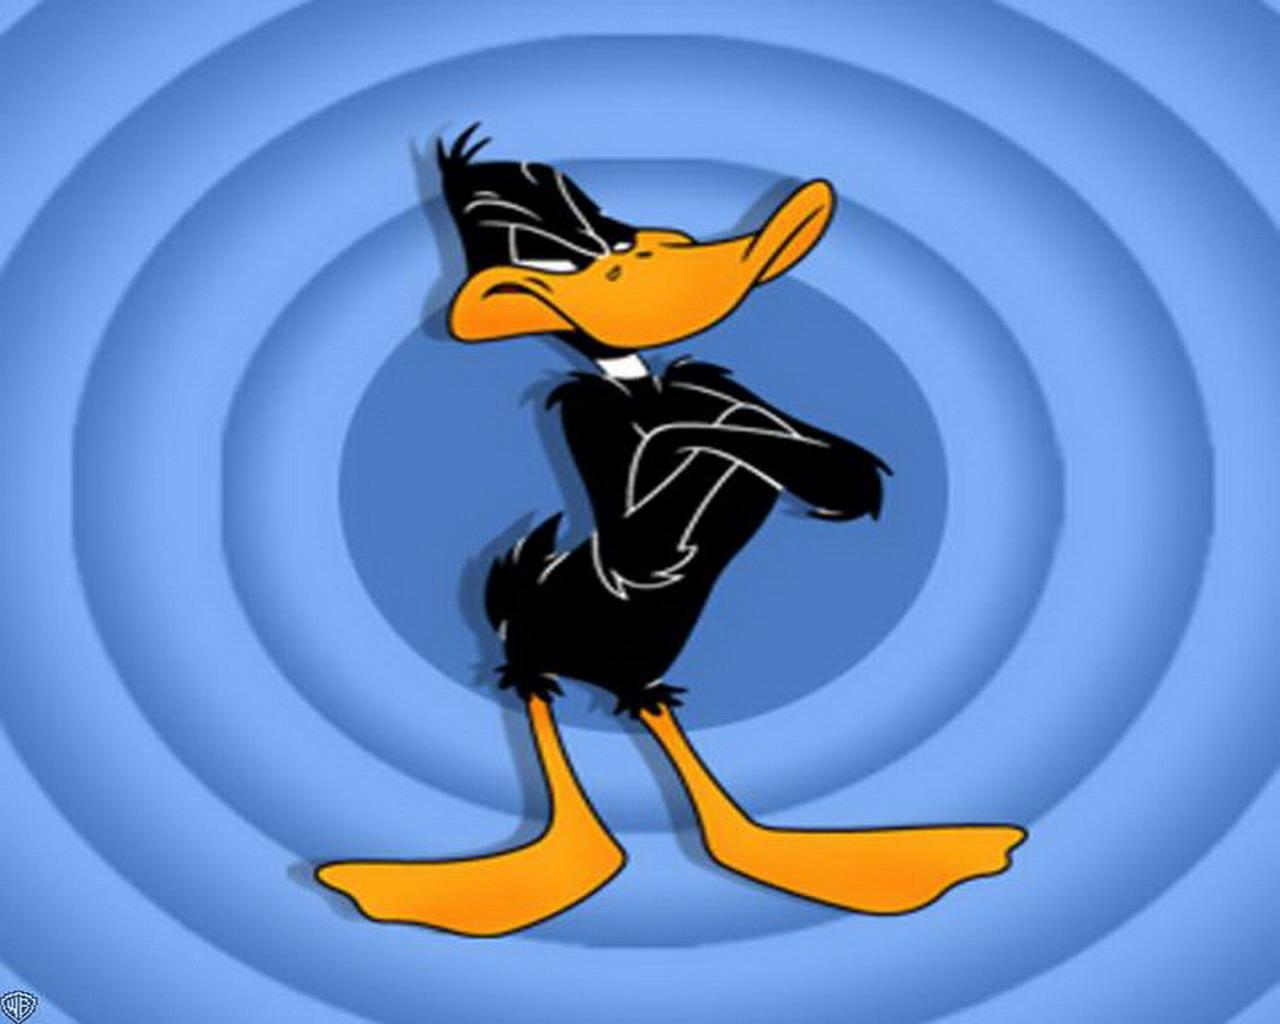 Daffy Duck Backgrounds, Compatible - PC, Mobile, Gadgets| 1280x1024 px